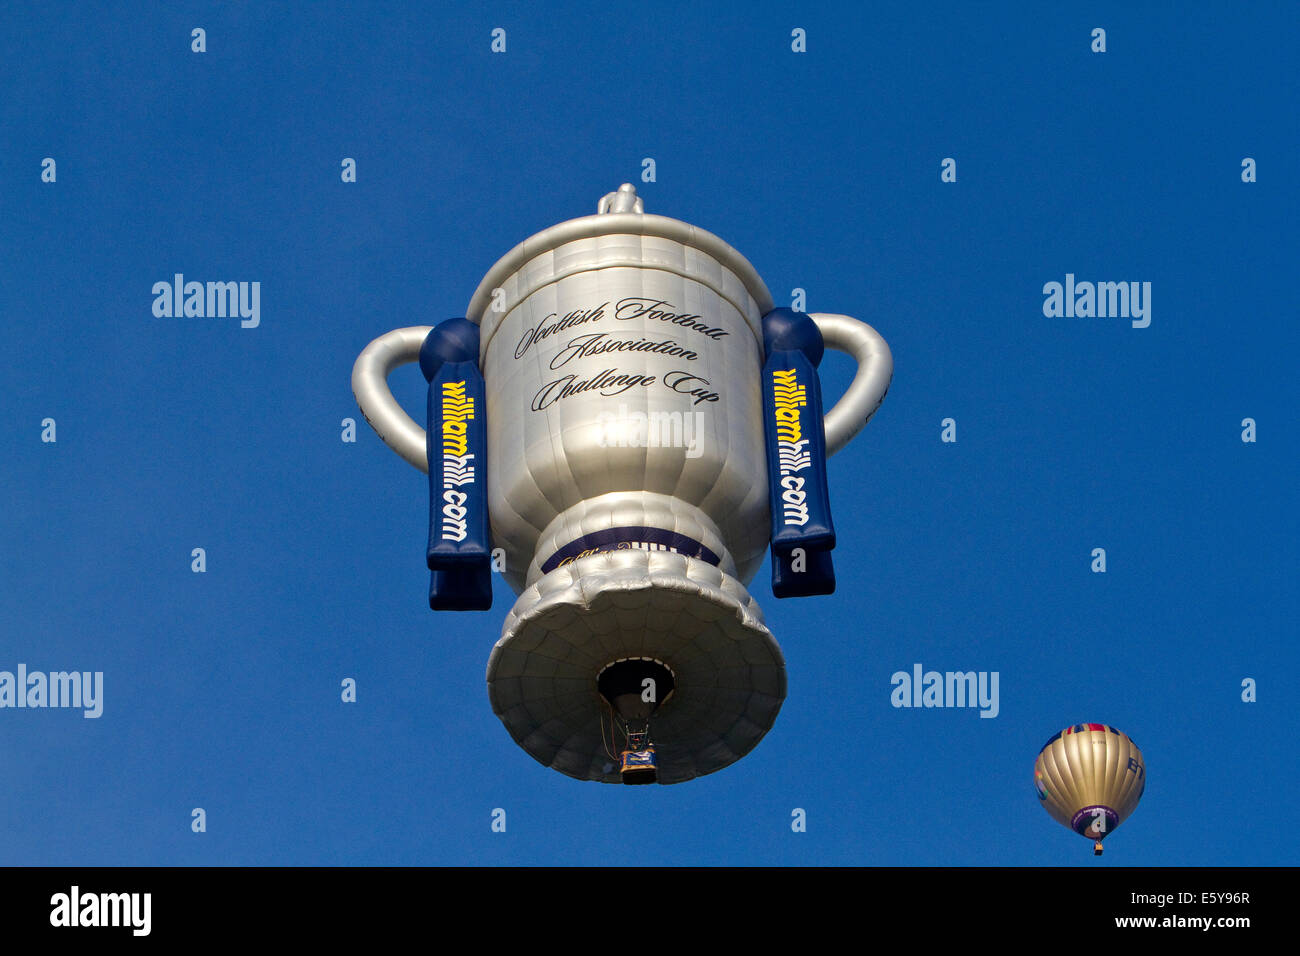 Bristol, UK. 8th August, 2014. Football cup Balloon lifts off during the Bristol International Balloon Fiesta Credit: Keith Larby/Alamy Live News Stock Photo